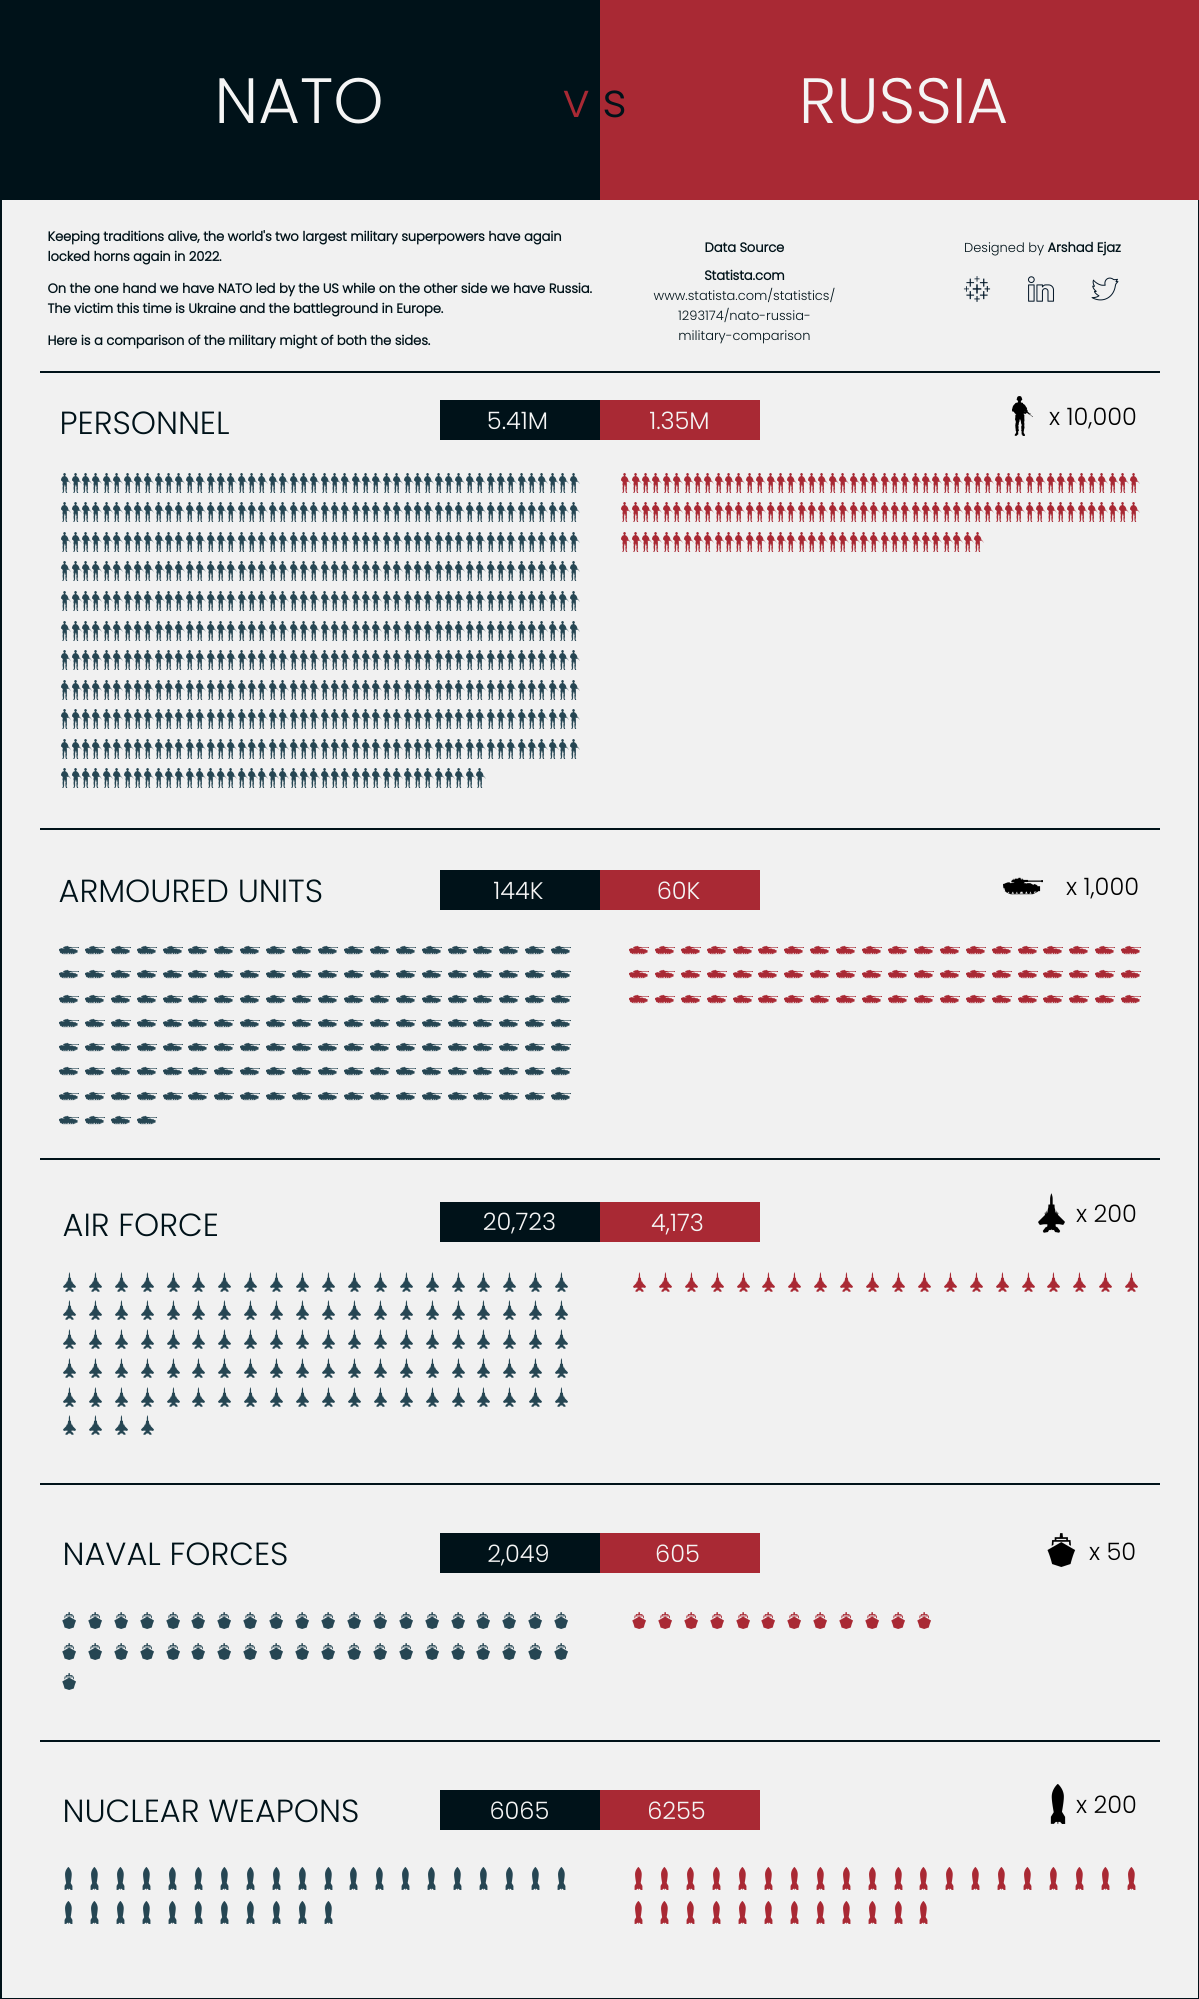 fascinating photos  - Comparison of NATO’s and Russia’ military strength